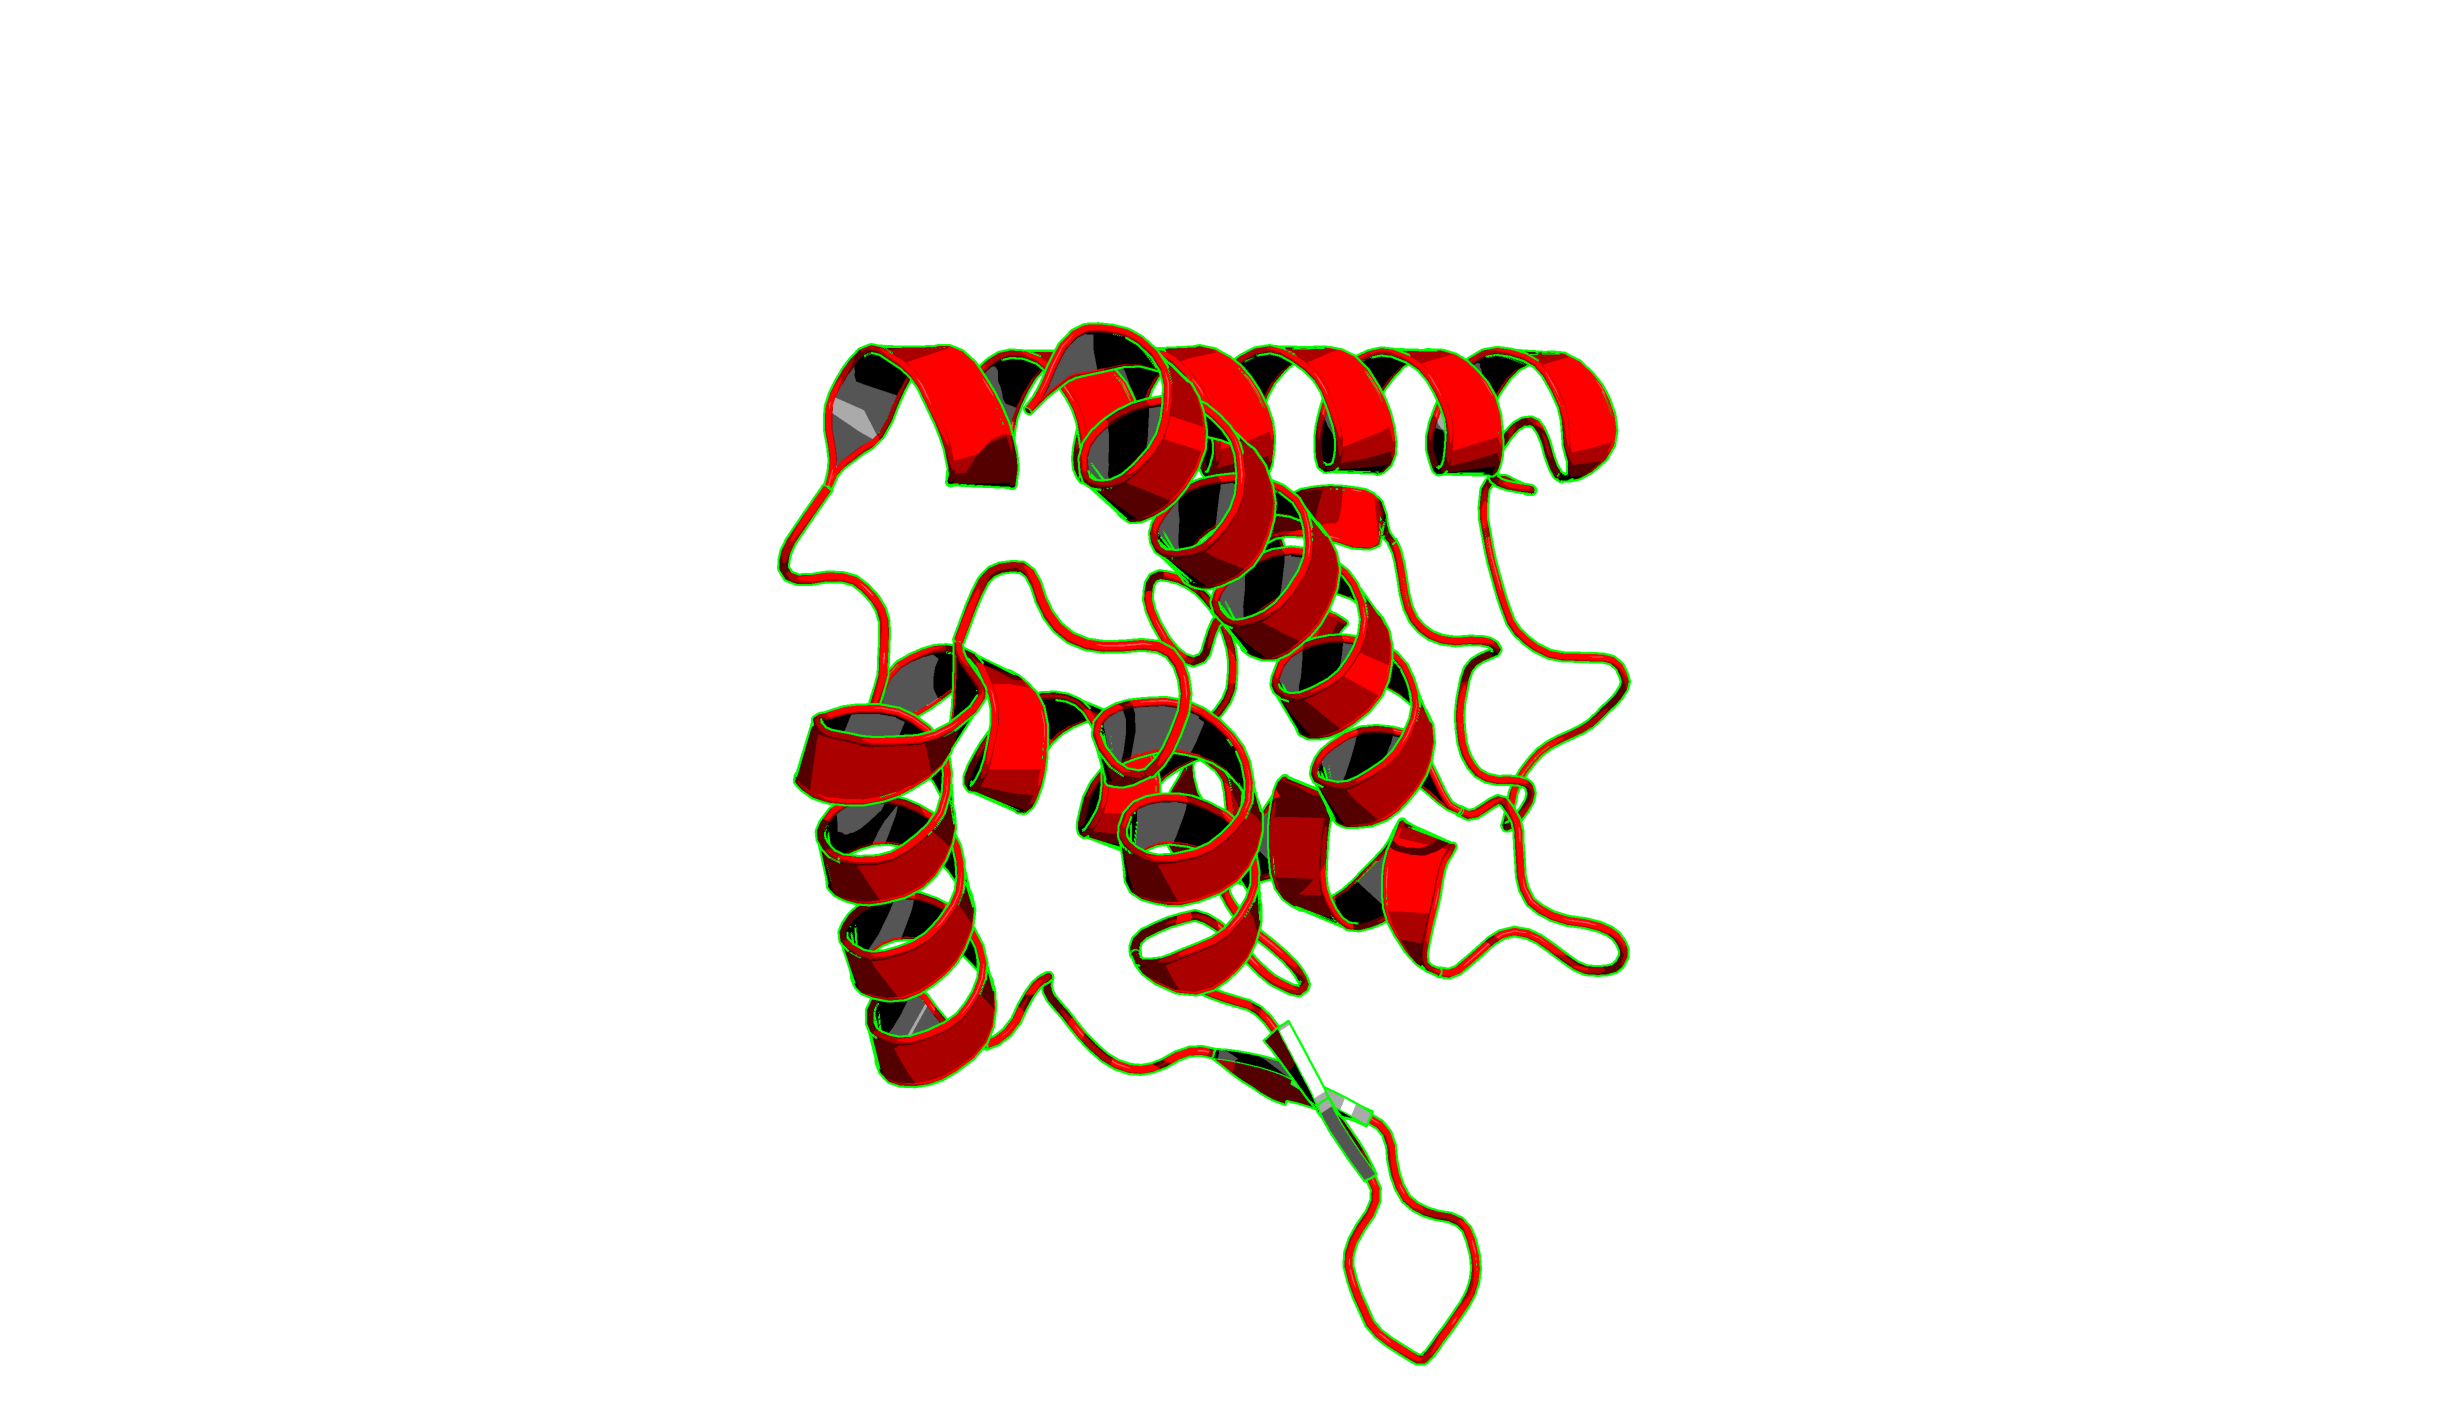  Ray trace mode of a protein in PyMOL with quantized colors plus green outline